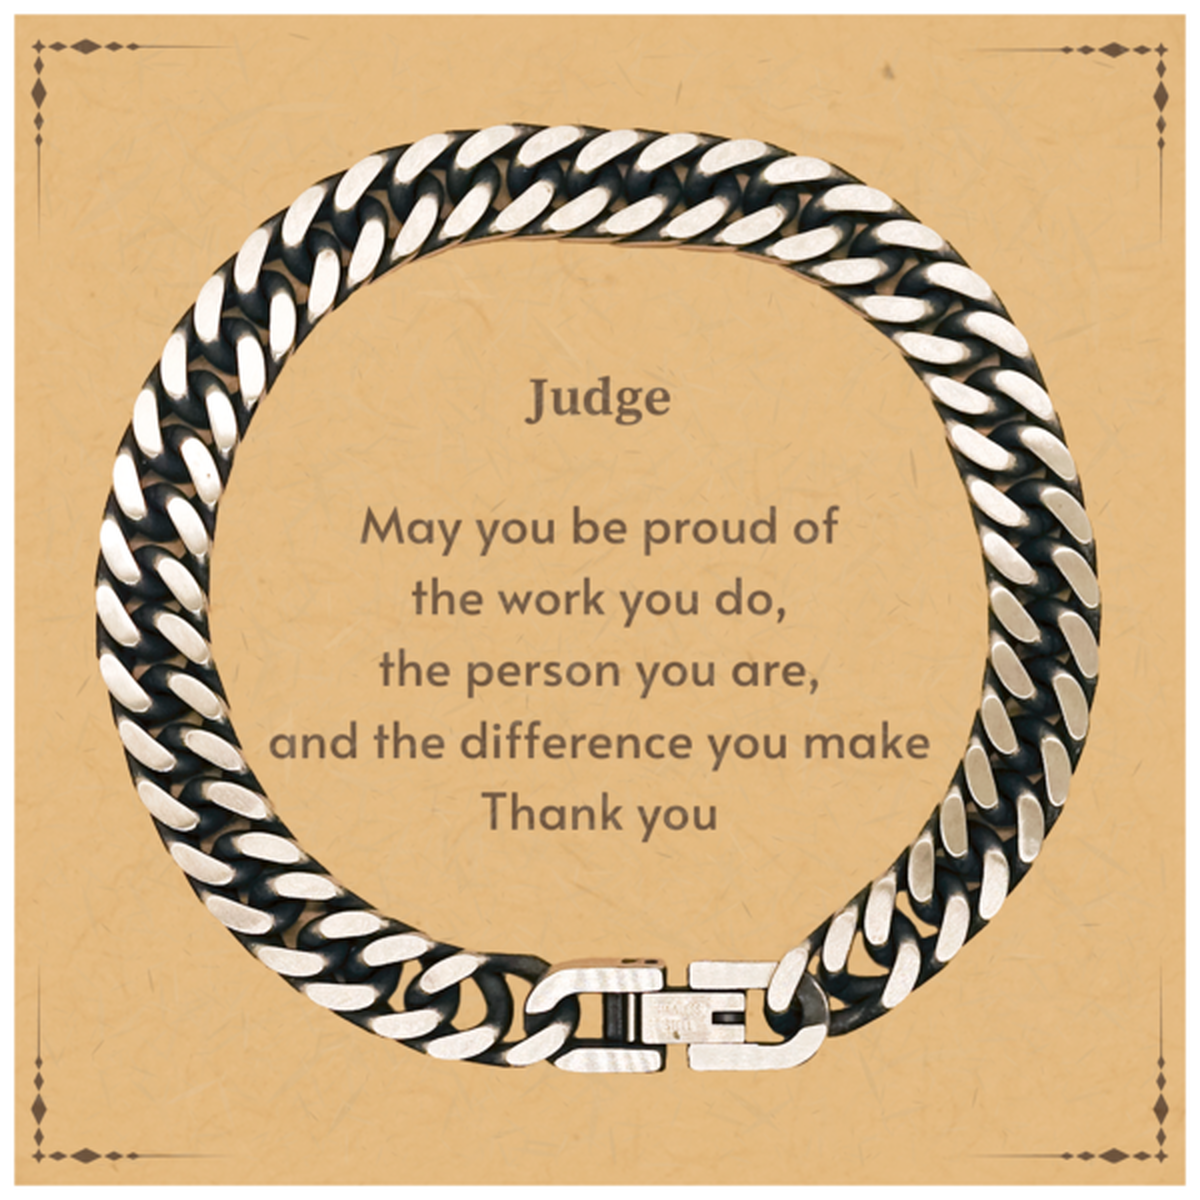 Heartwarming Cuban Link Chain Bracelet Retirement Coworkers Gifts for Judge, Judge May You be proud of the work you do, the person you are Gifts for Boss Men Women Friends